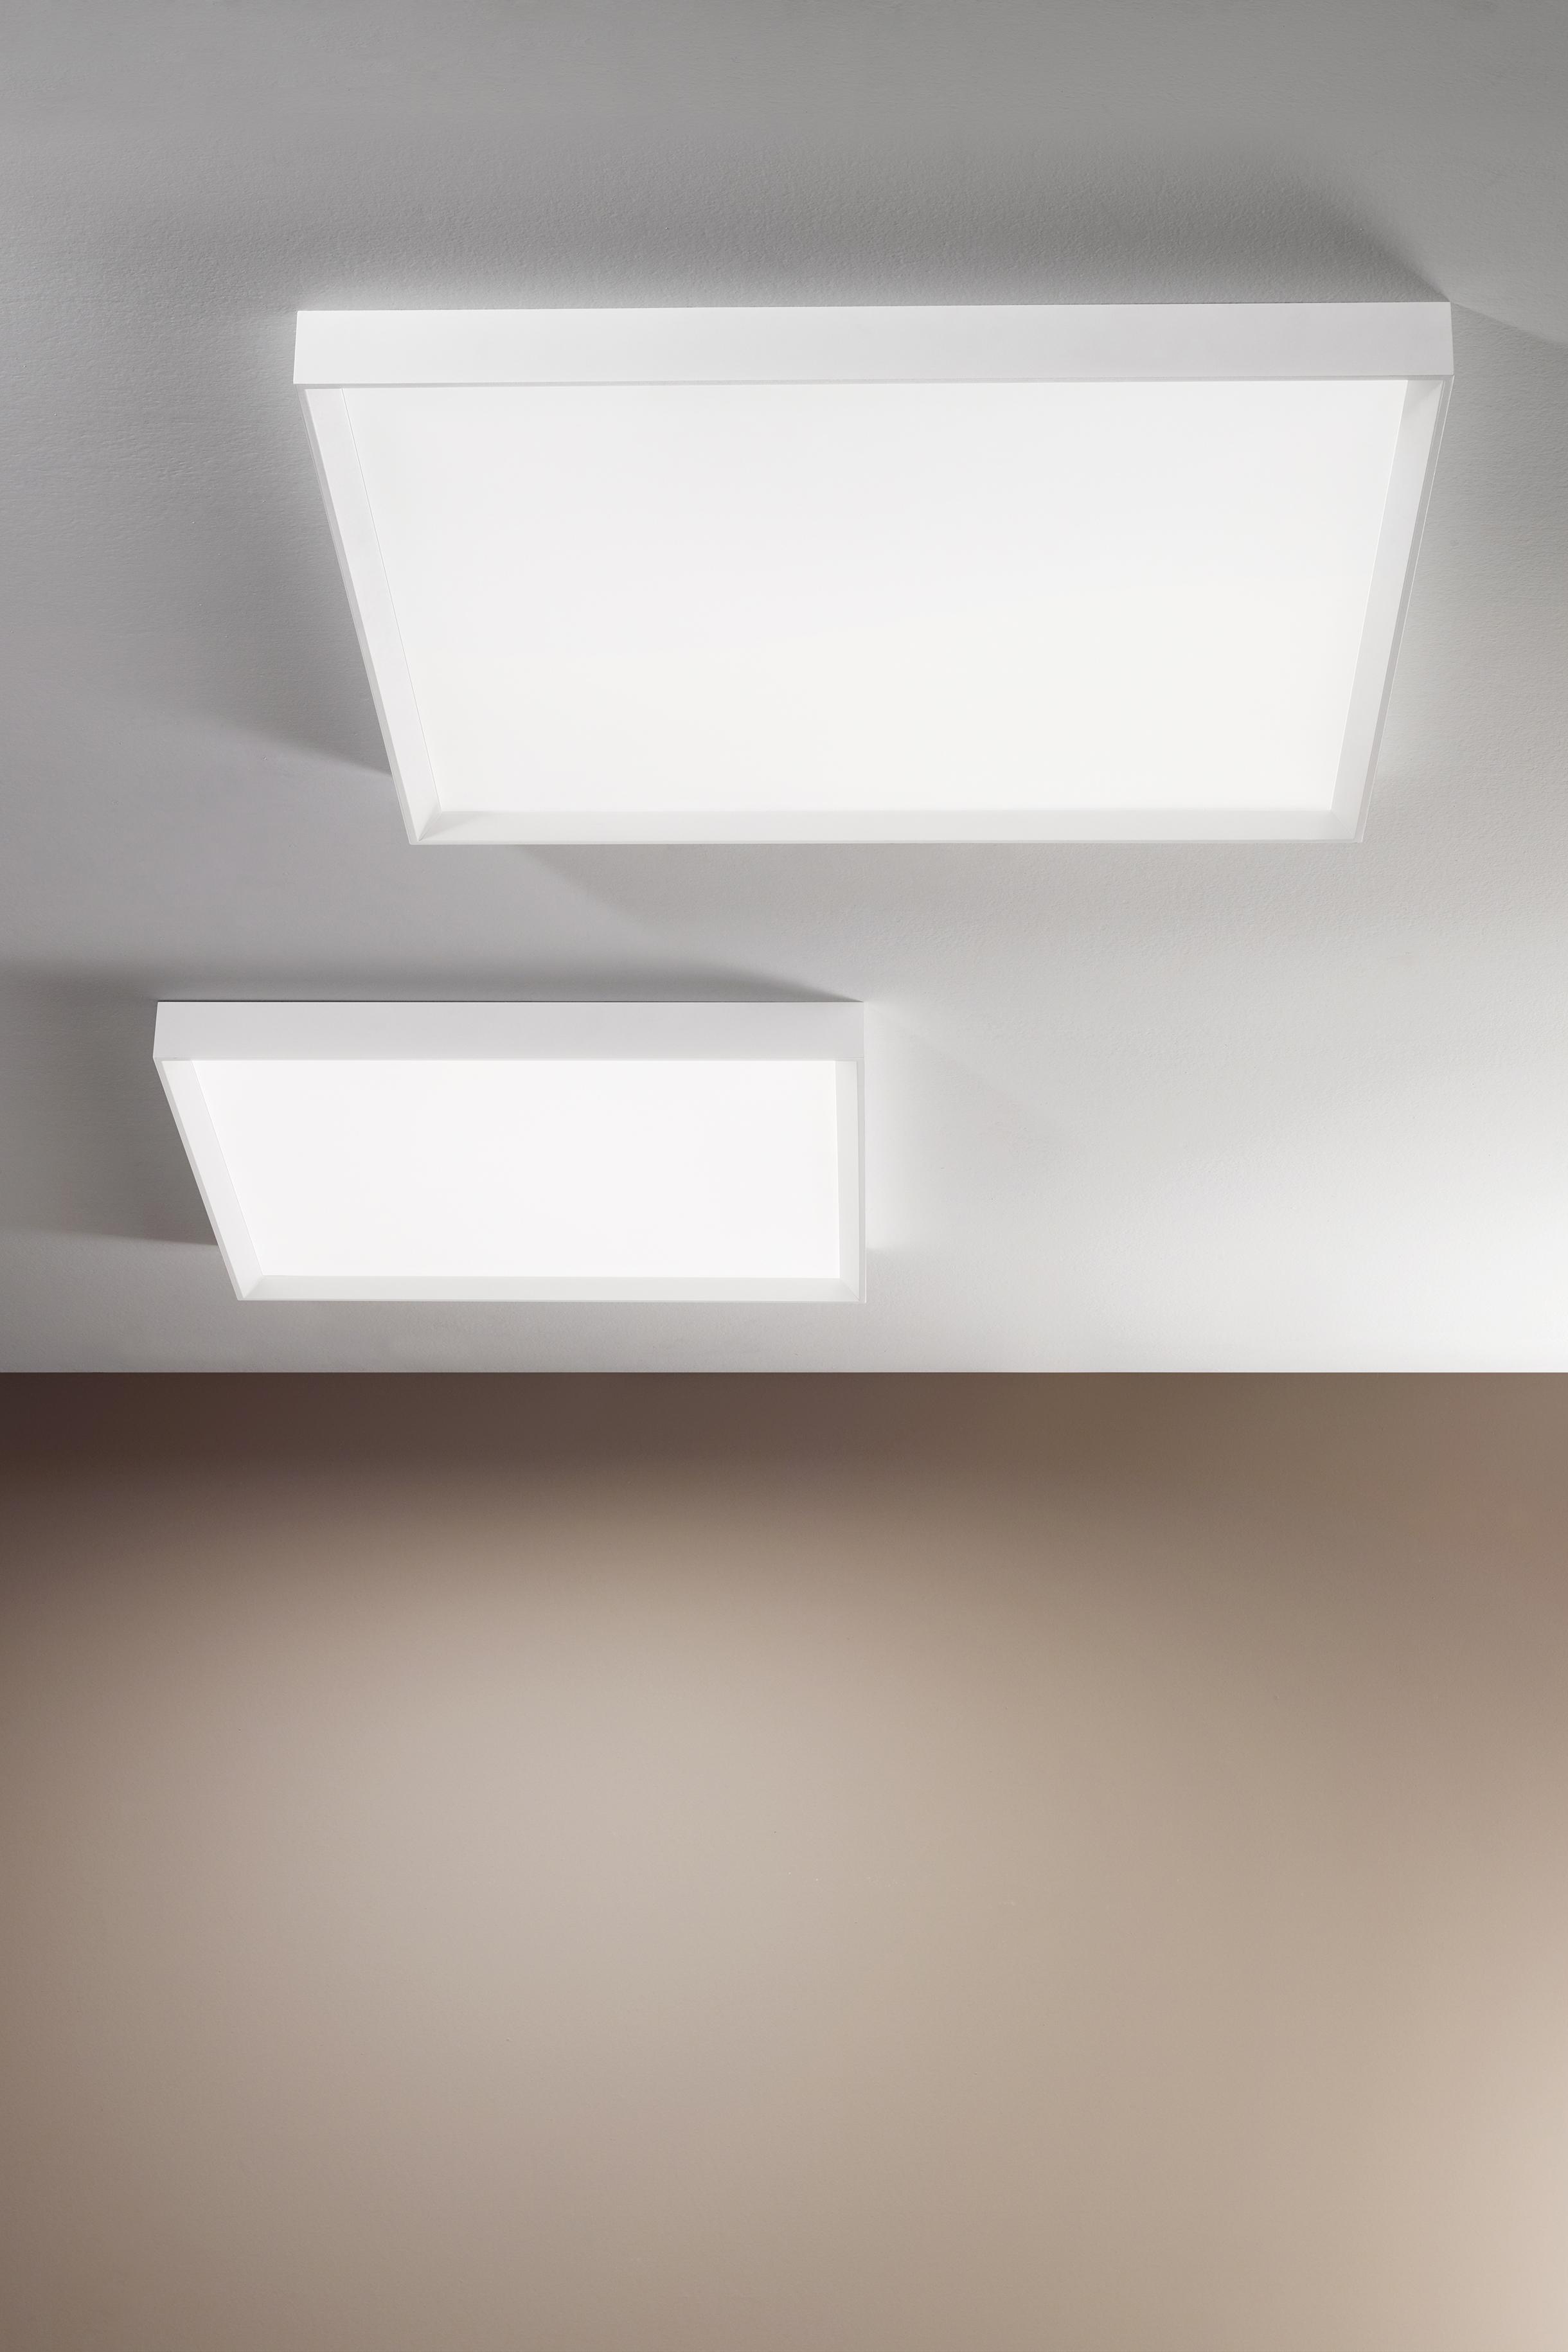 Gallery Product Tara Ceiling Wall Linealightgroup 1280X1920 3